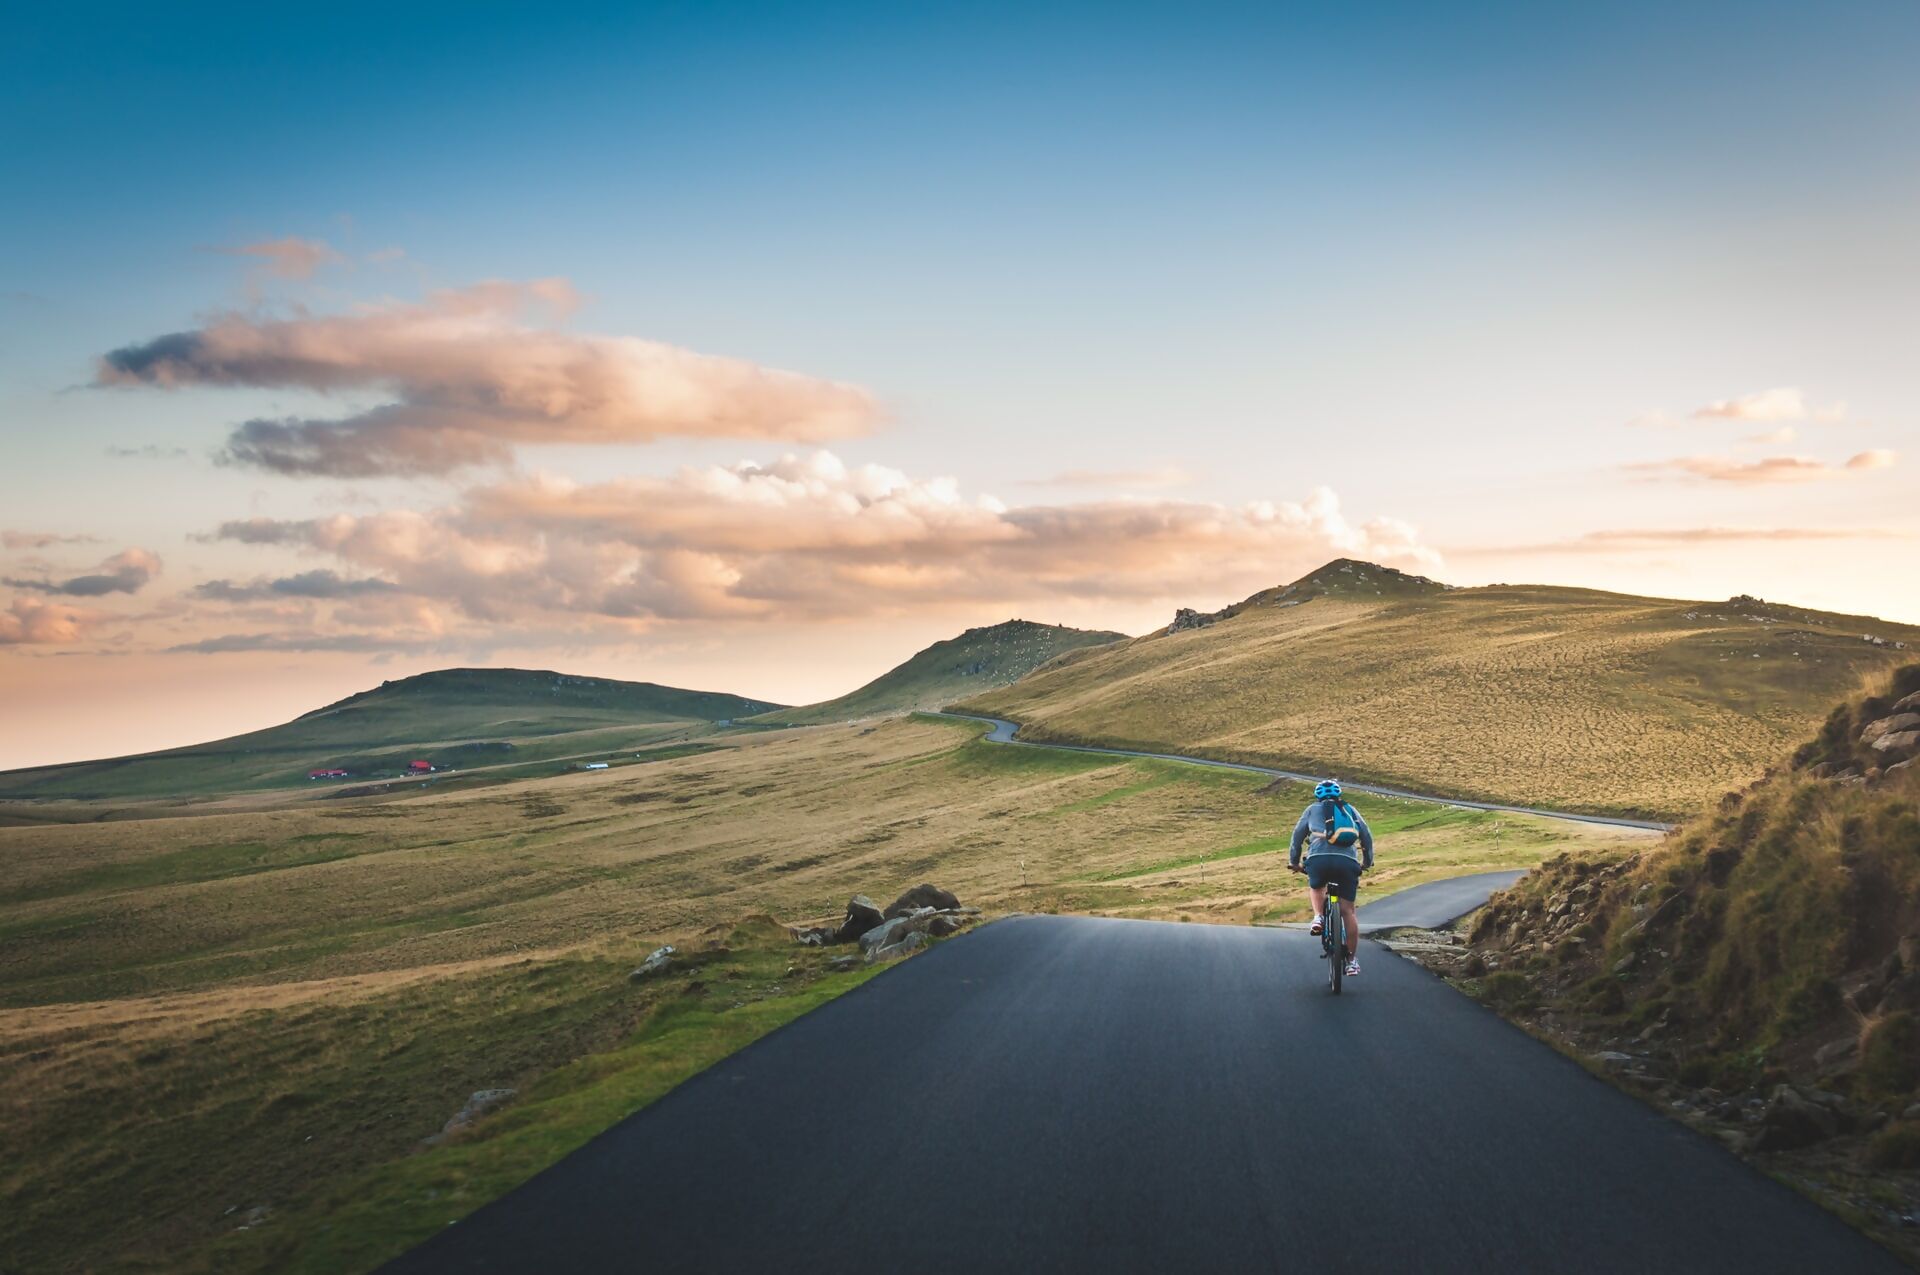 Cycling in the countryside<br>Photo by David Marcu on Unsplash